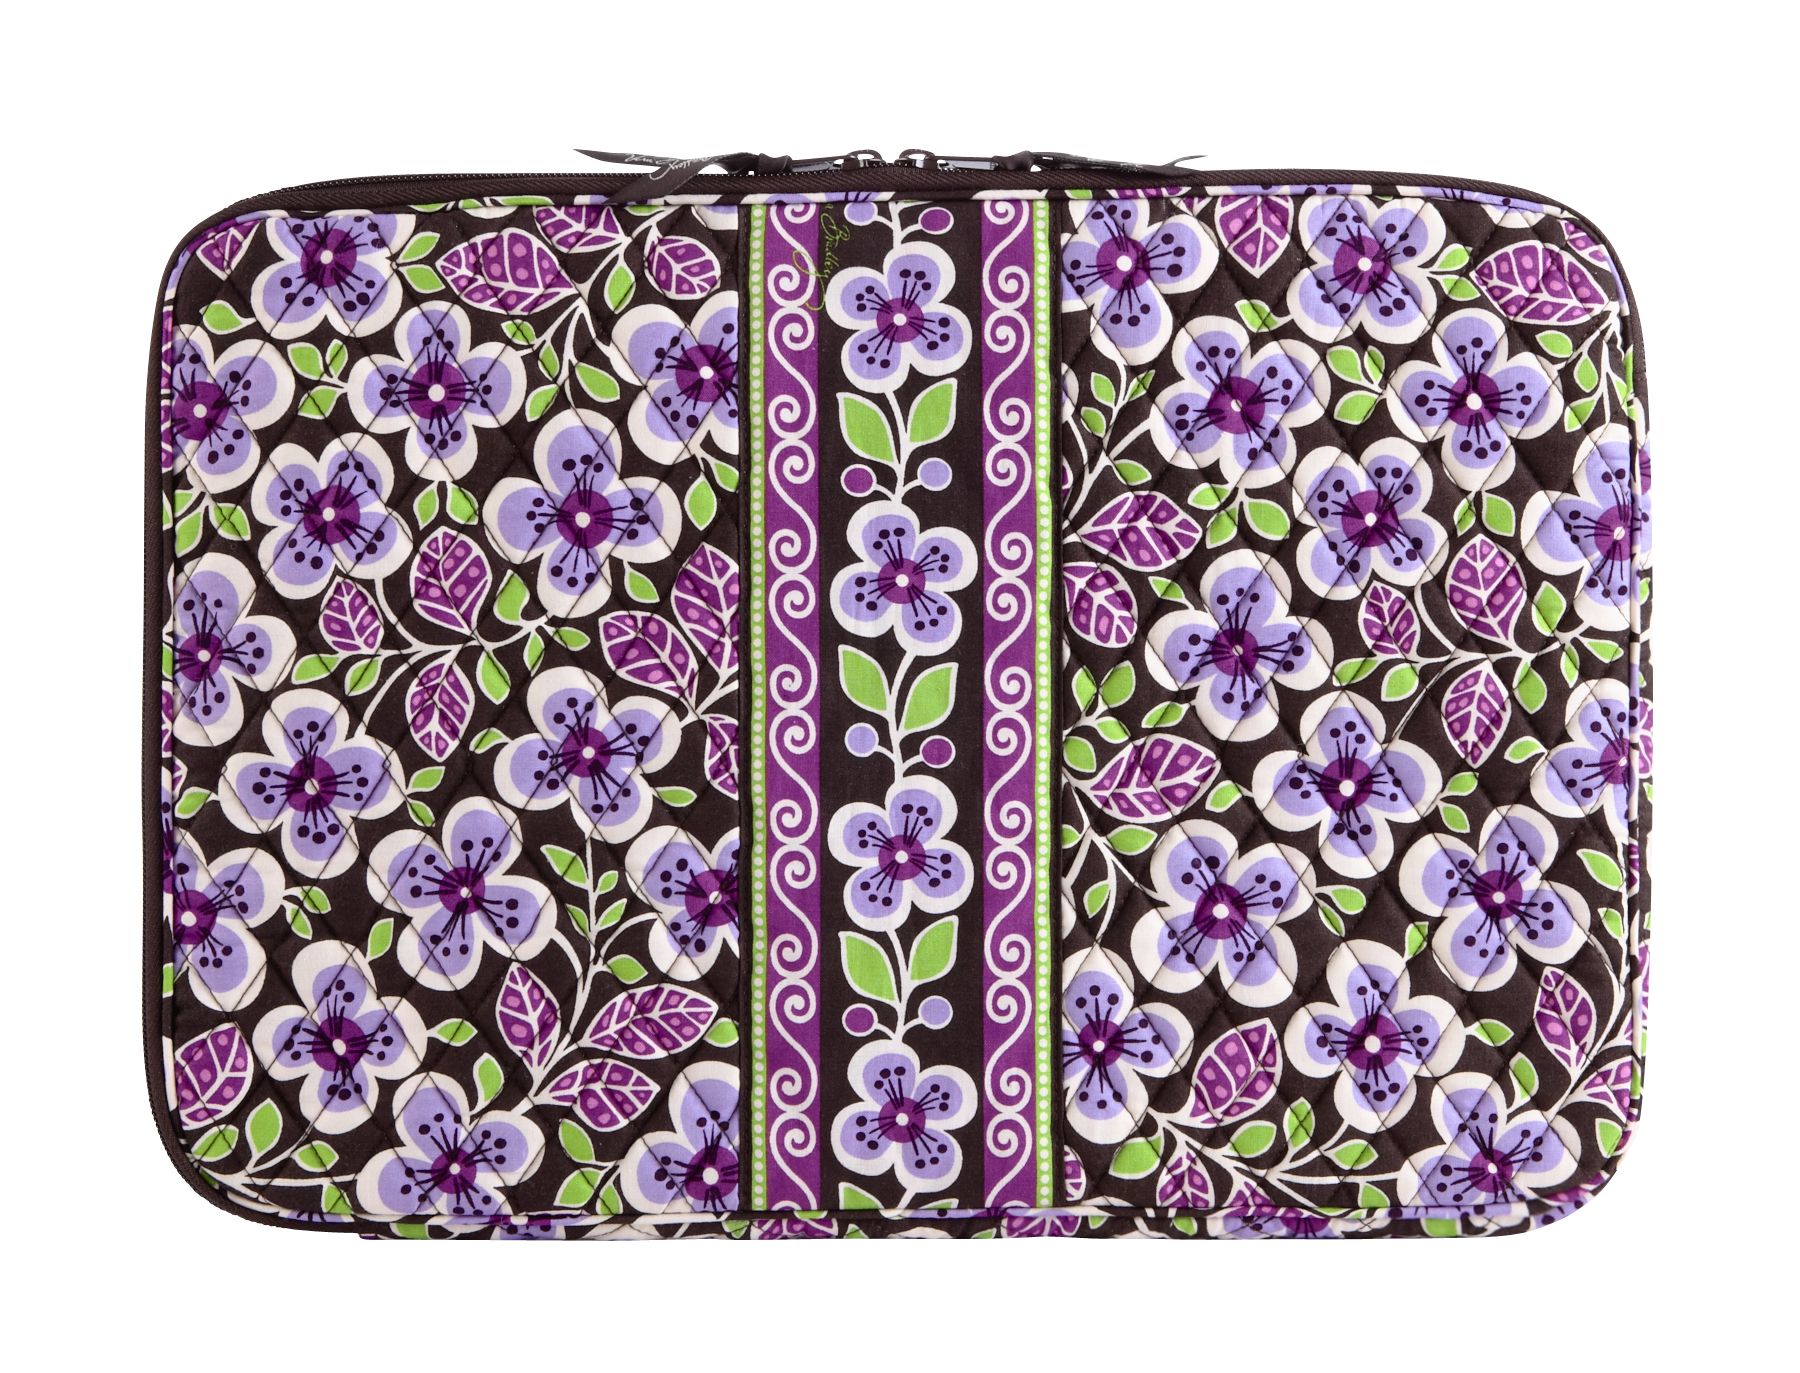 know that Vera Bradley is super popular at this time of year for ...